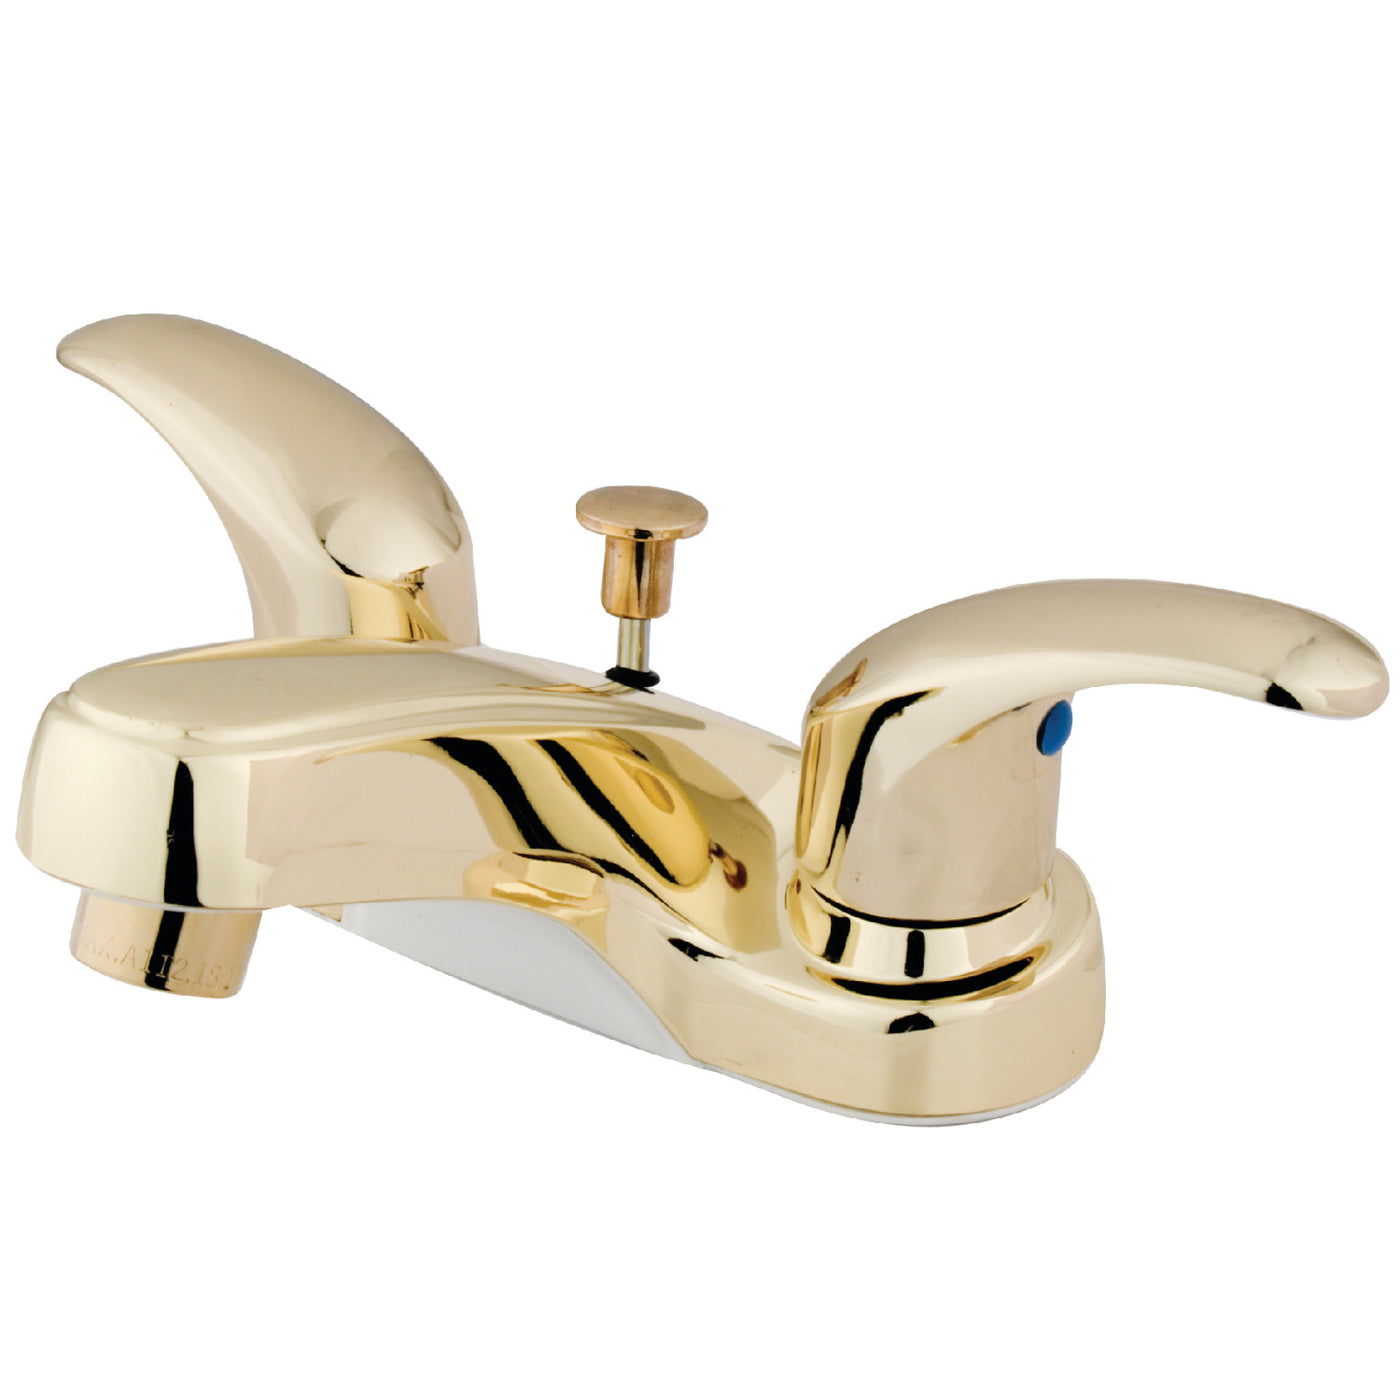 Elements of Design EB6252 4-Inch Centerset Bathroom Faucet, Polished Brass